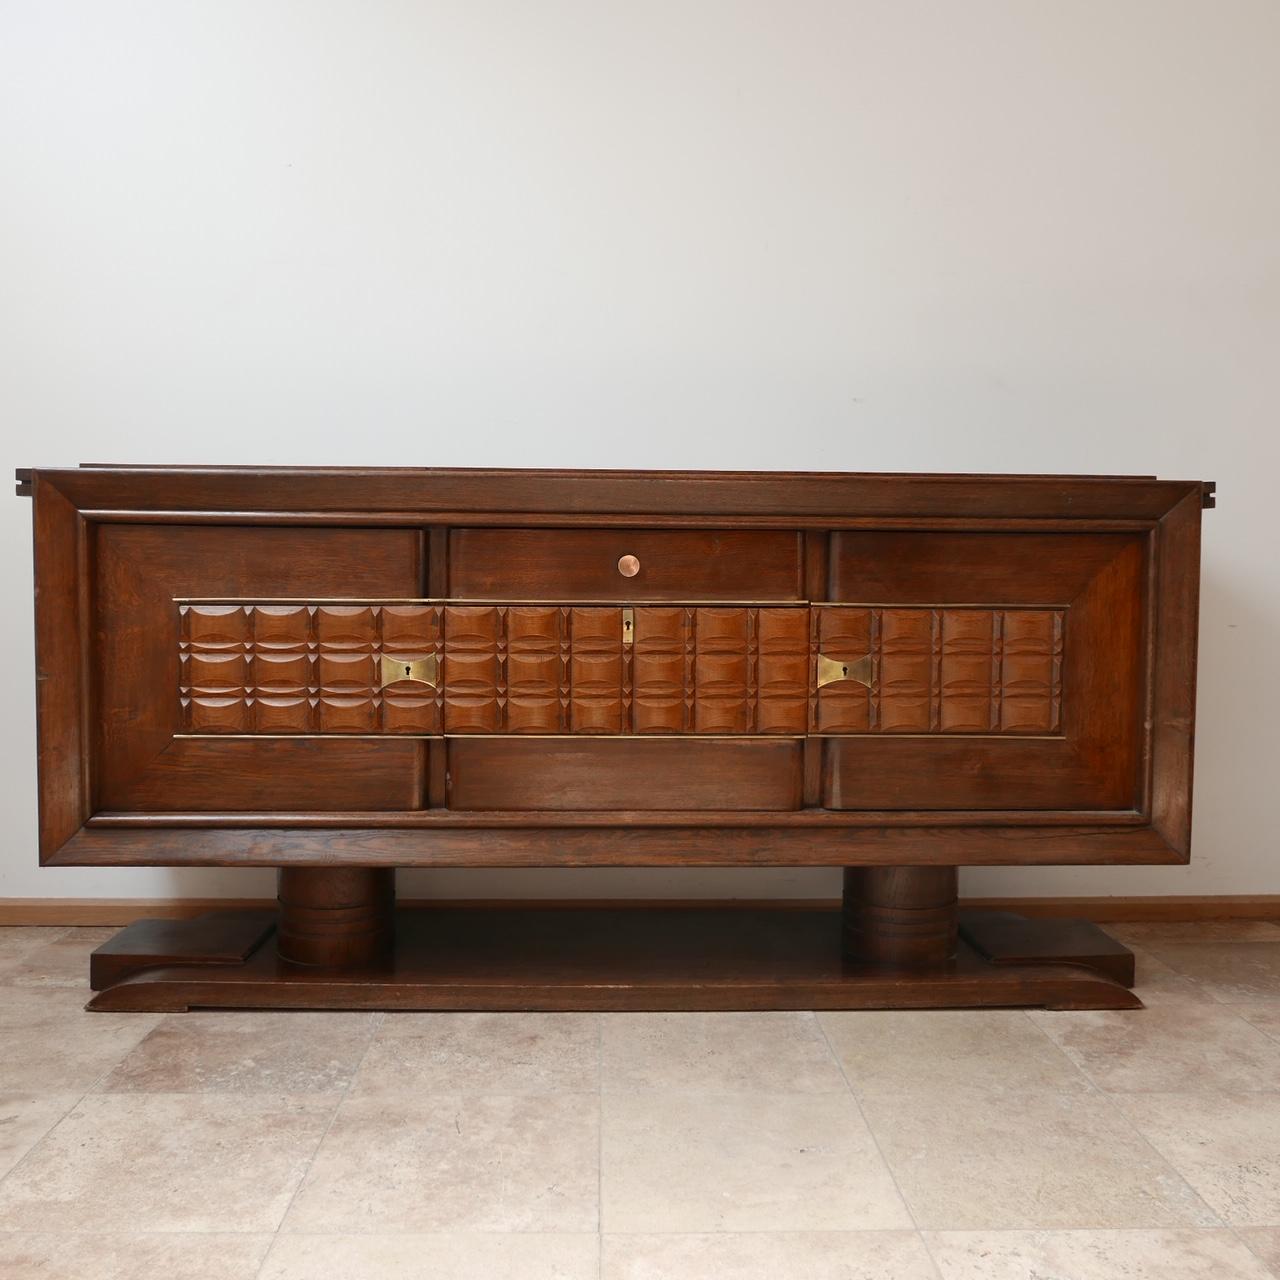 A large credenza or sideboard. 

France, c1930s. 

Art deco. 

Wooden, brass hard hardware. 

Good condition. 

Two doors on the left and right, the central strand has a drawer and drop down door cabinet. 

Dimensions: 220 W x 103 H x 54